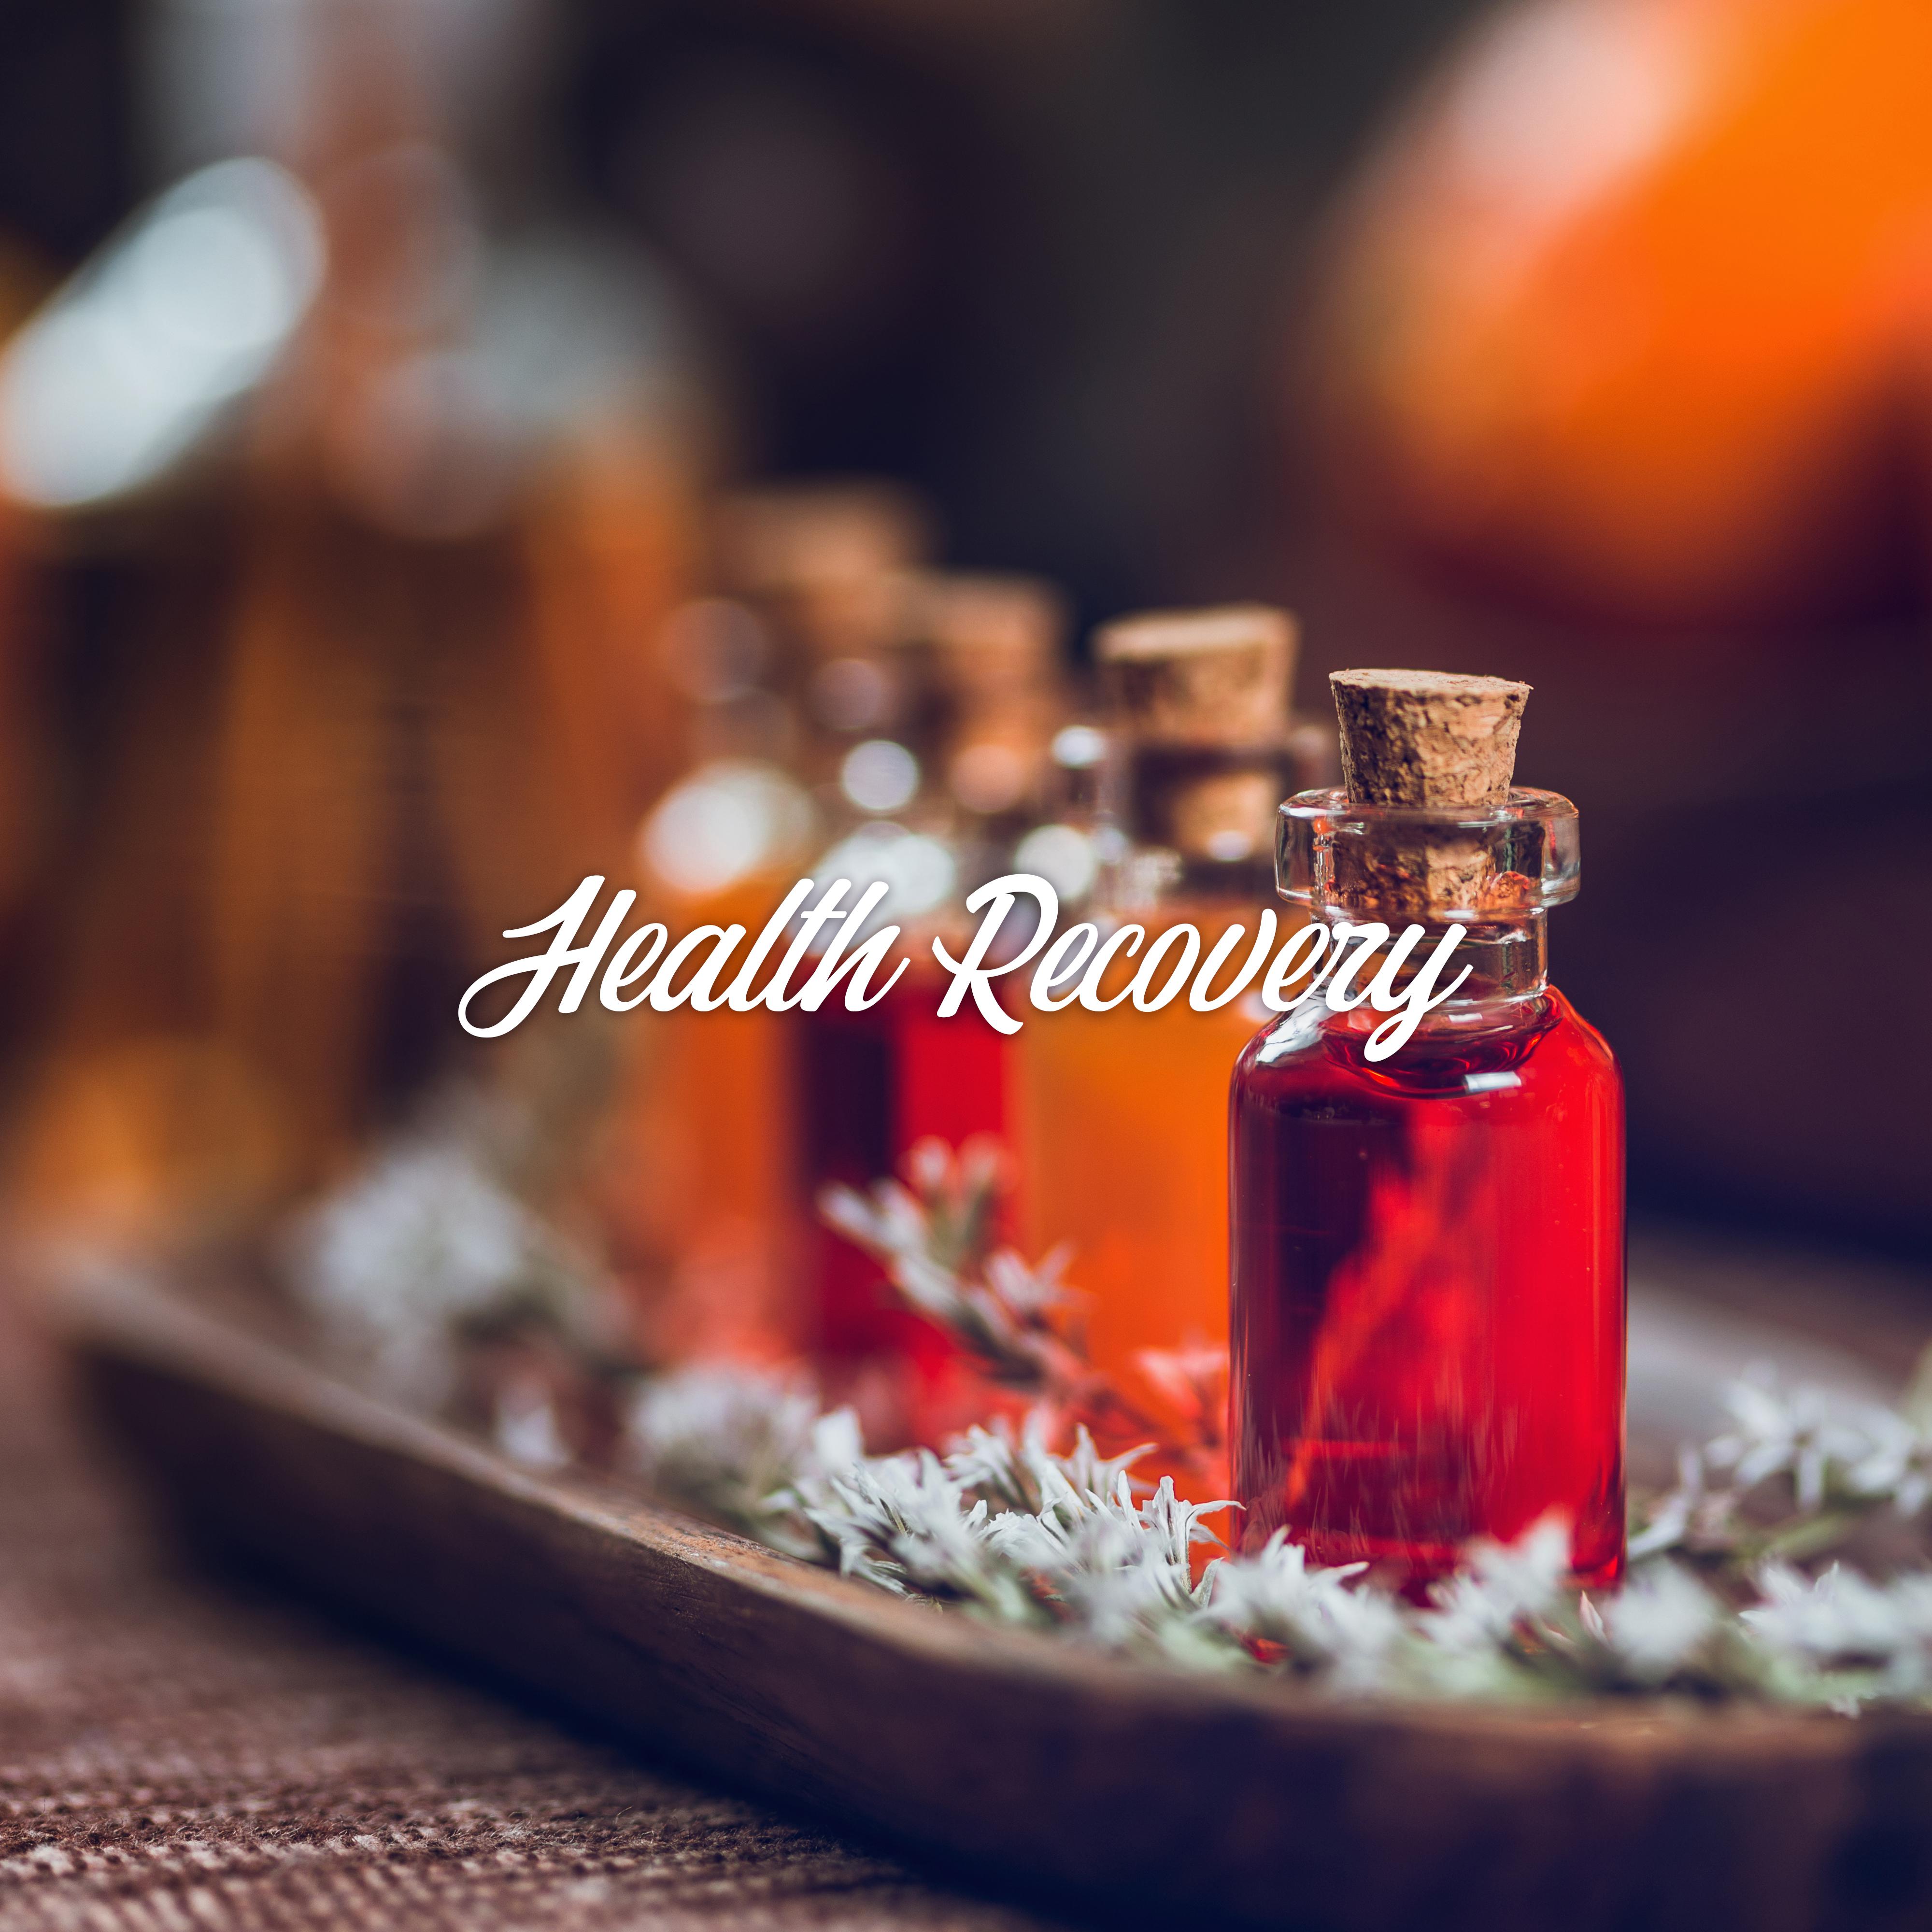 Health Recovery  Music for Aromatherapy Massage, Bath, Inhalation and Spa